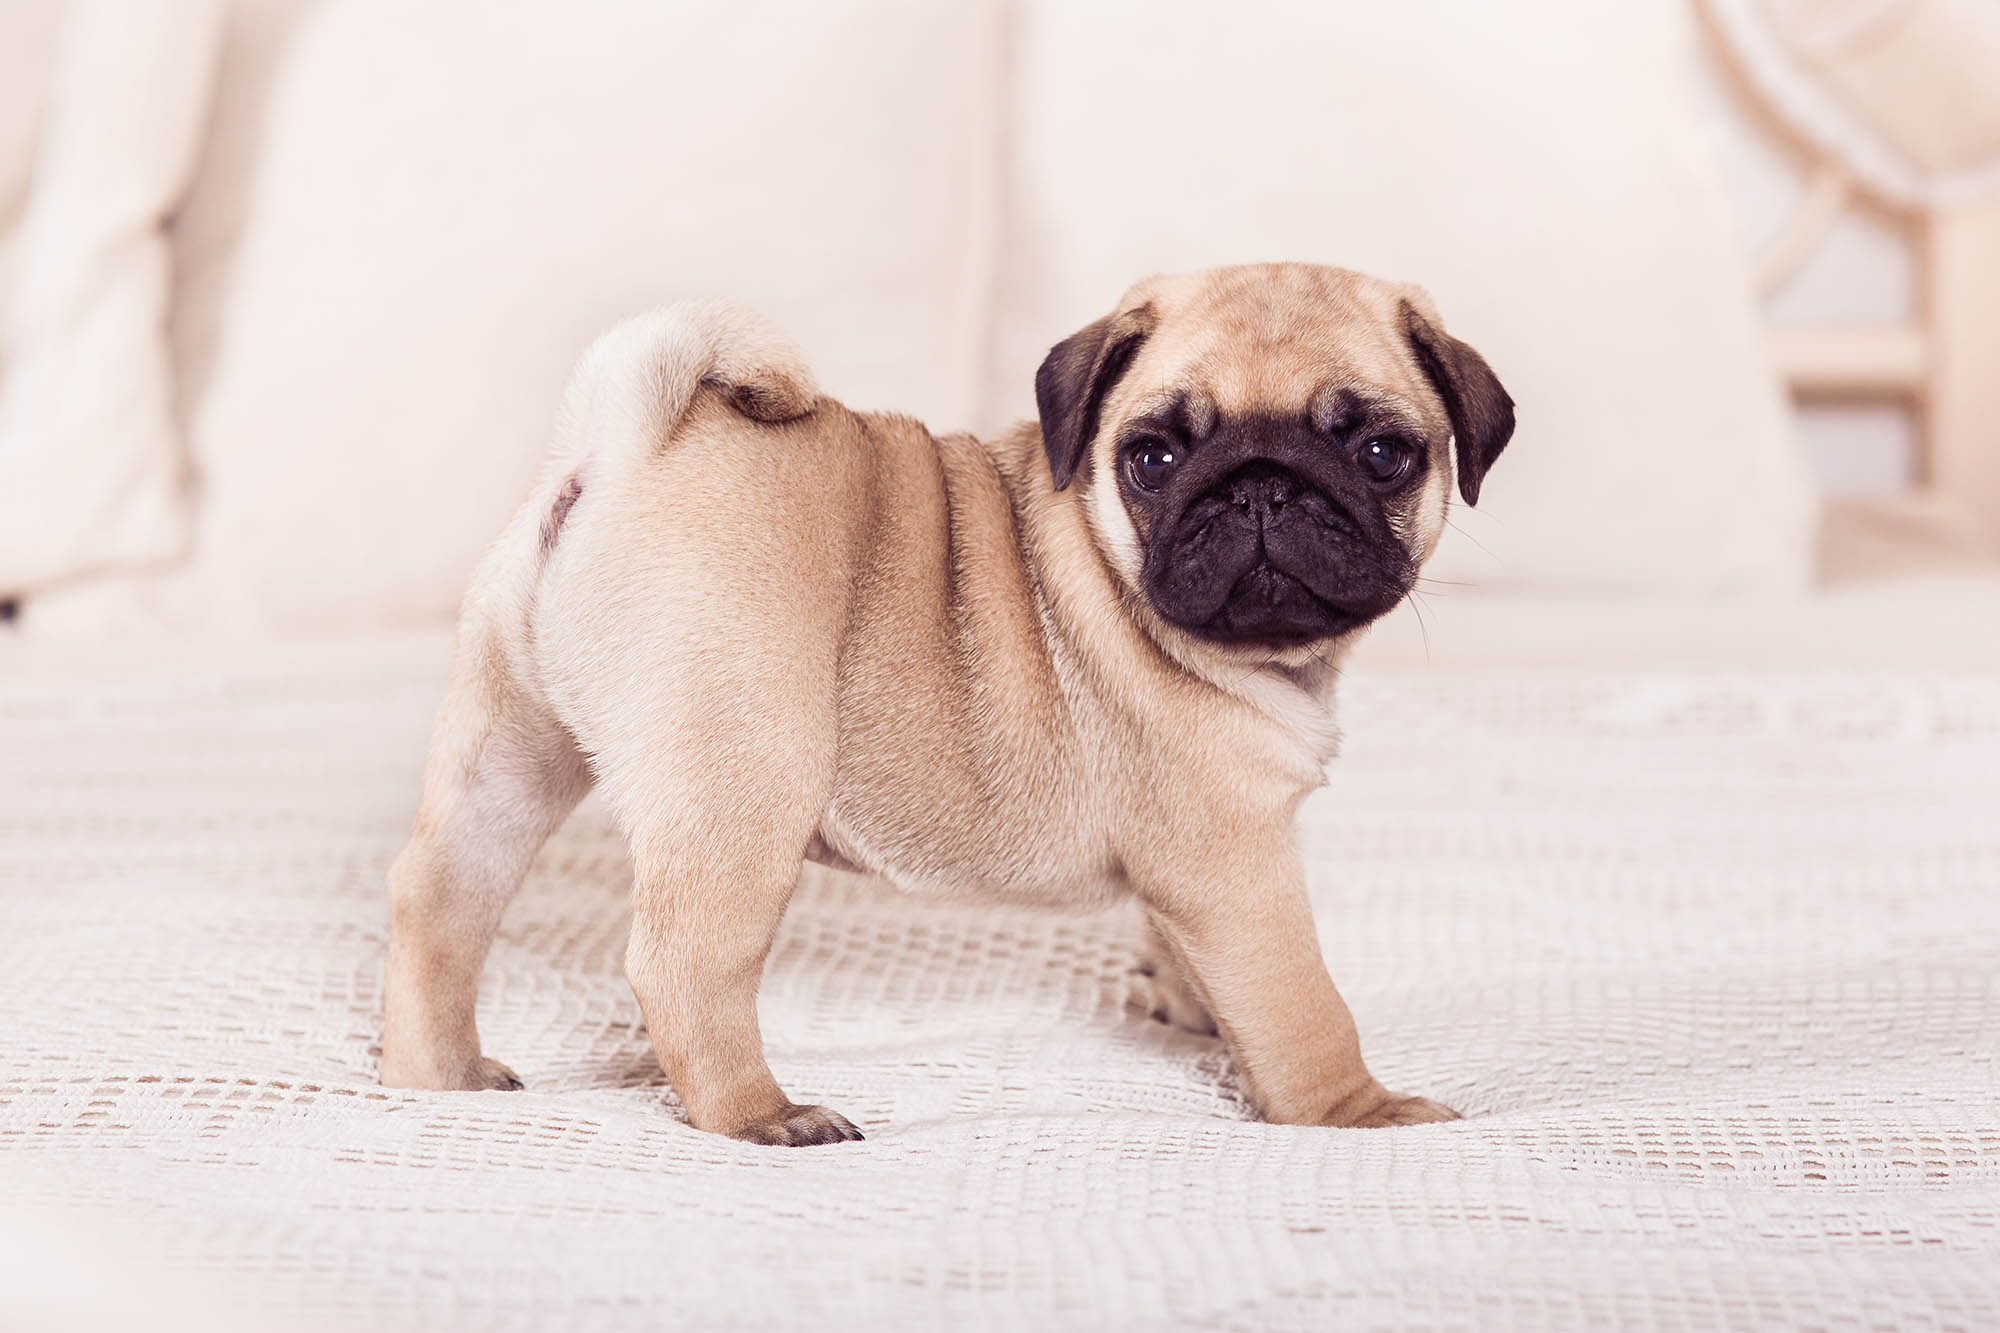 Taking Care of Your Sweet, Little Pug Puppy Furry Babies